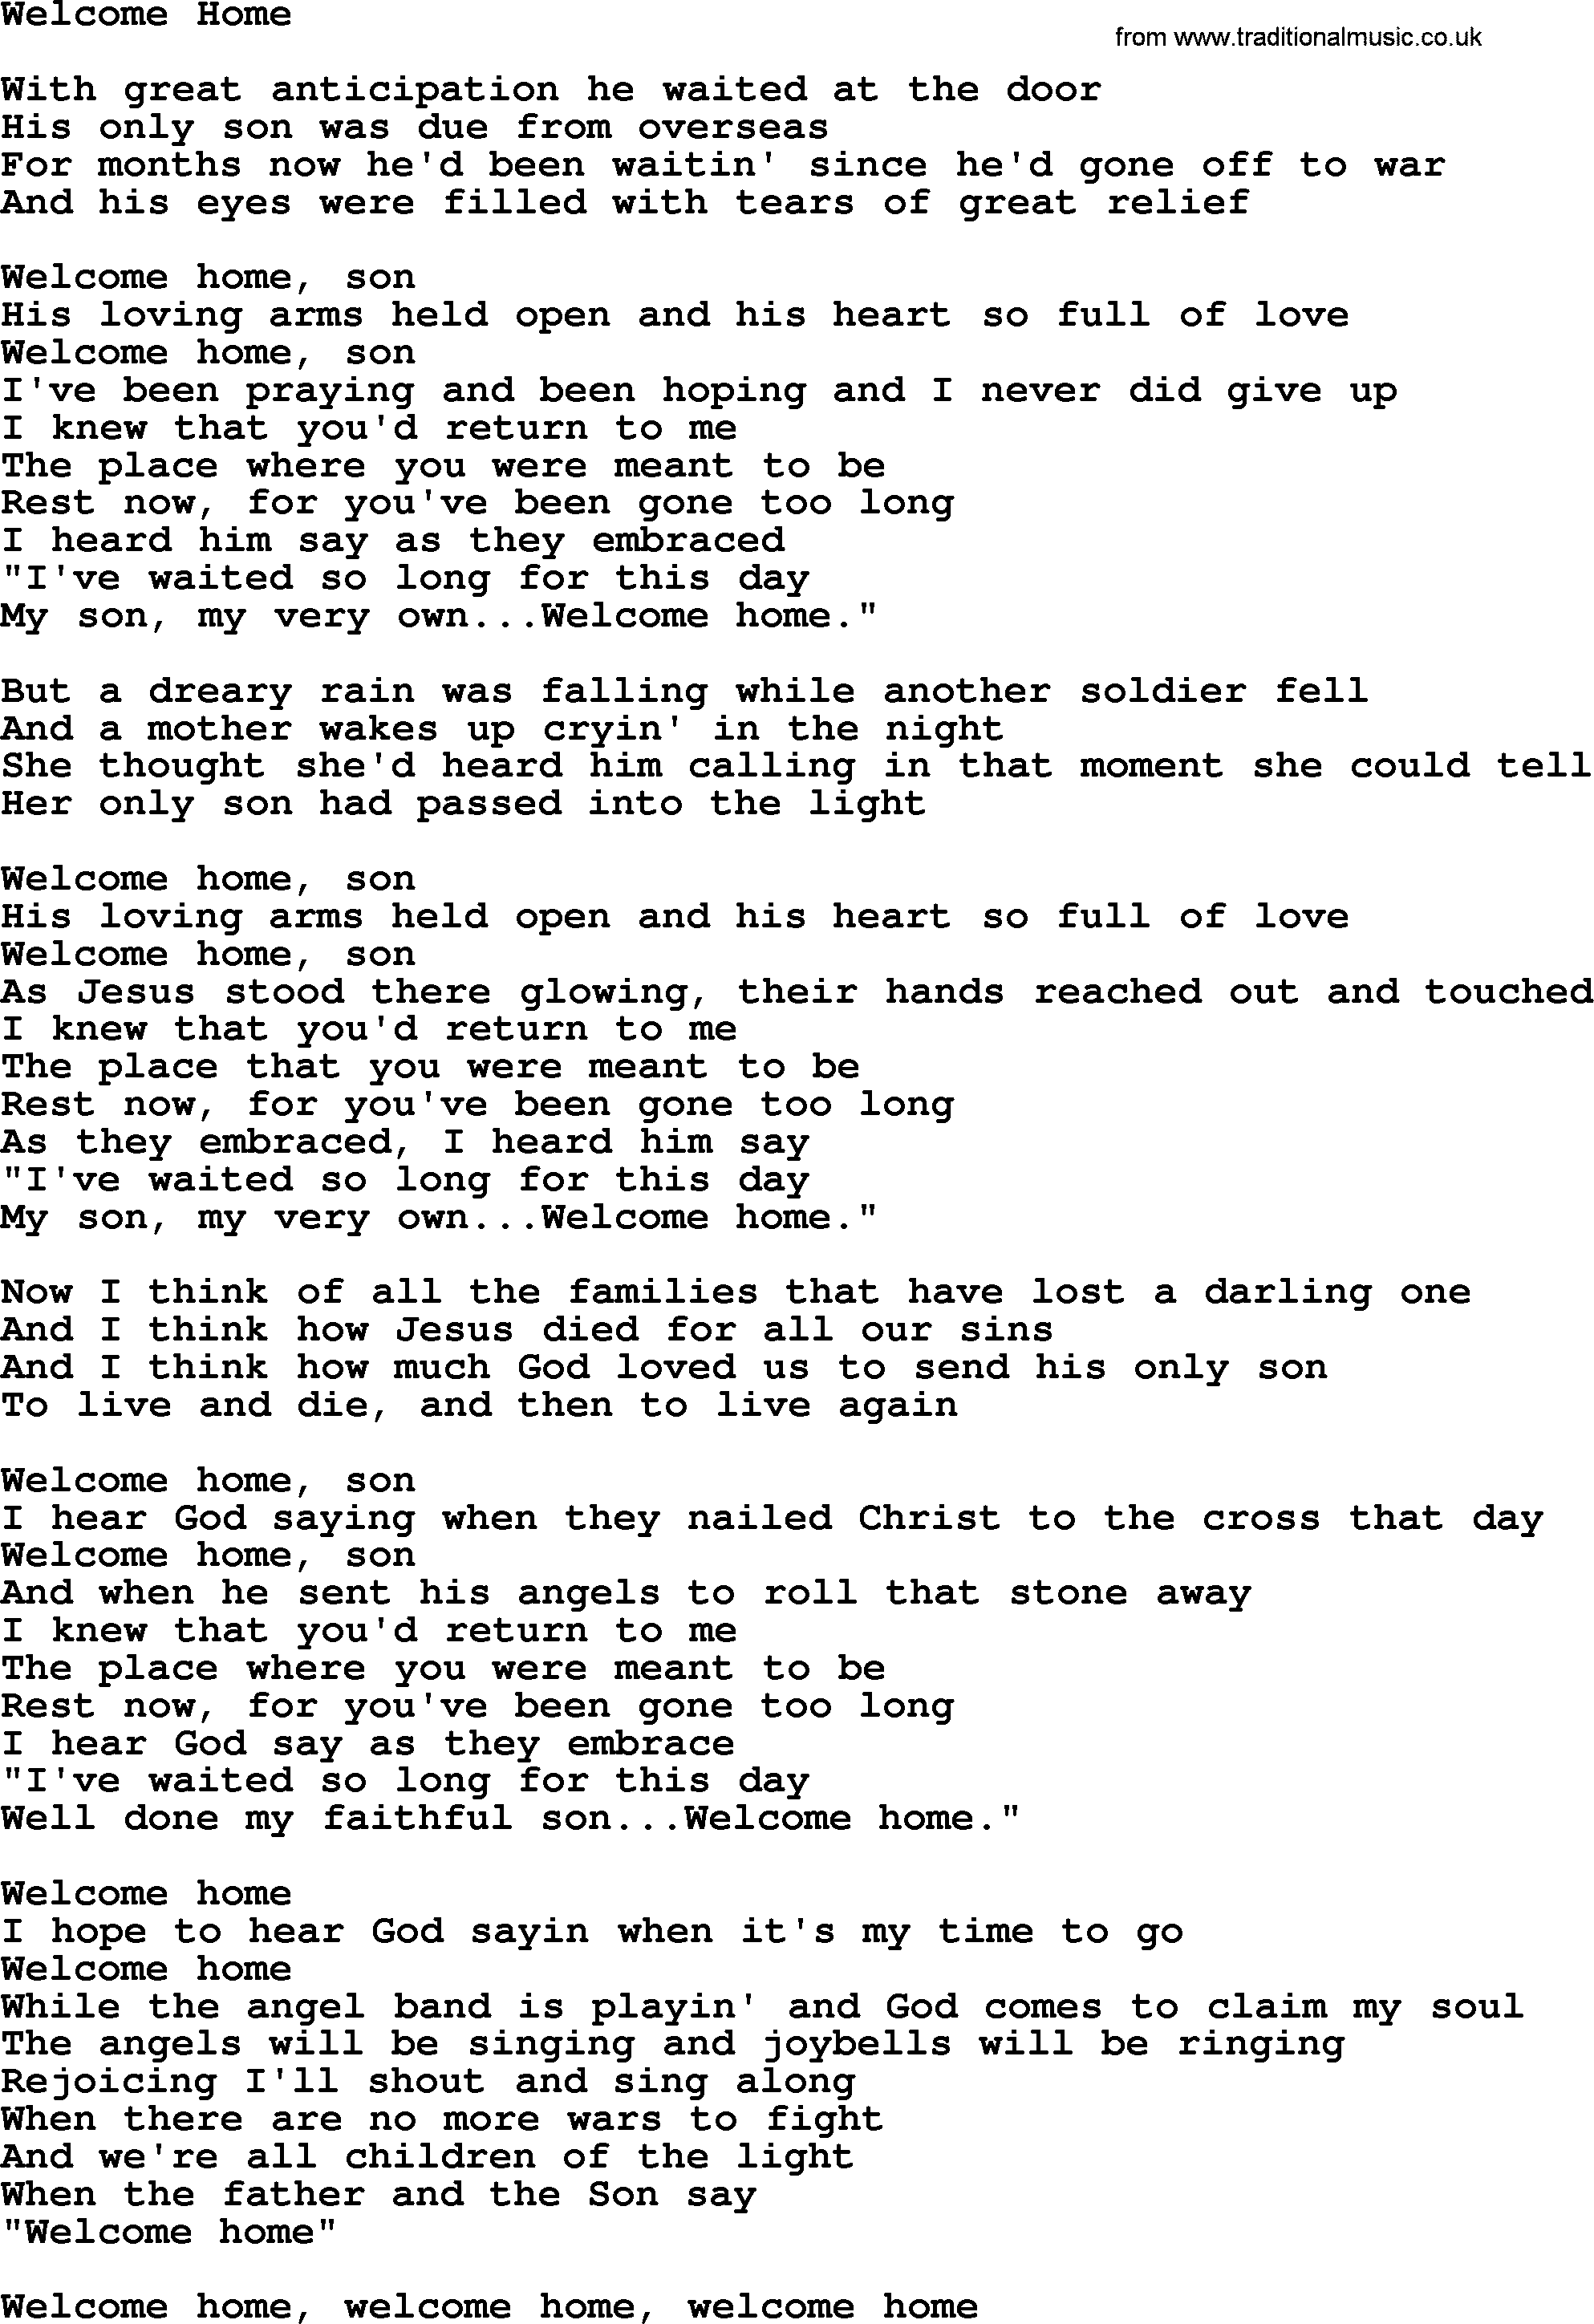 Dolly Parton song Welcome Home.txt lyrics